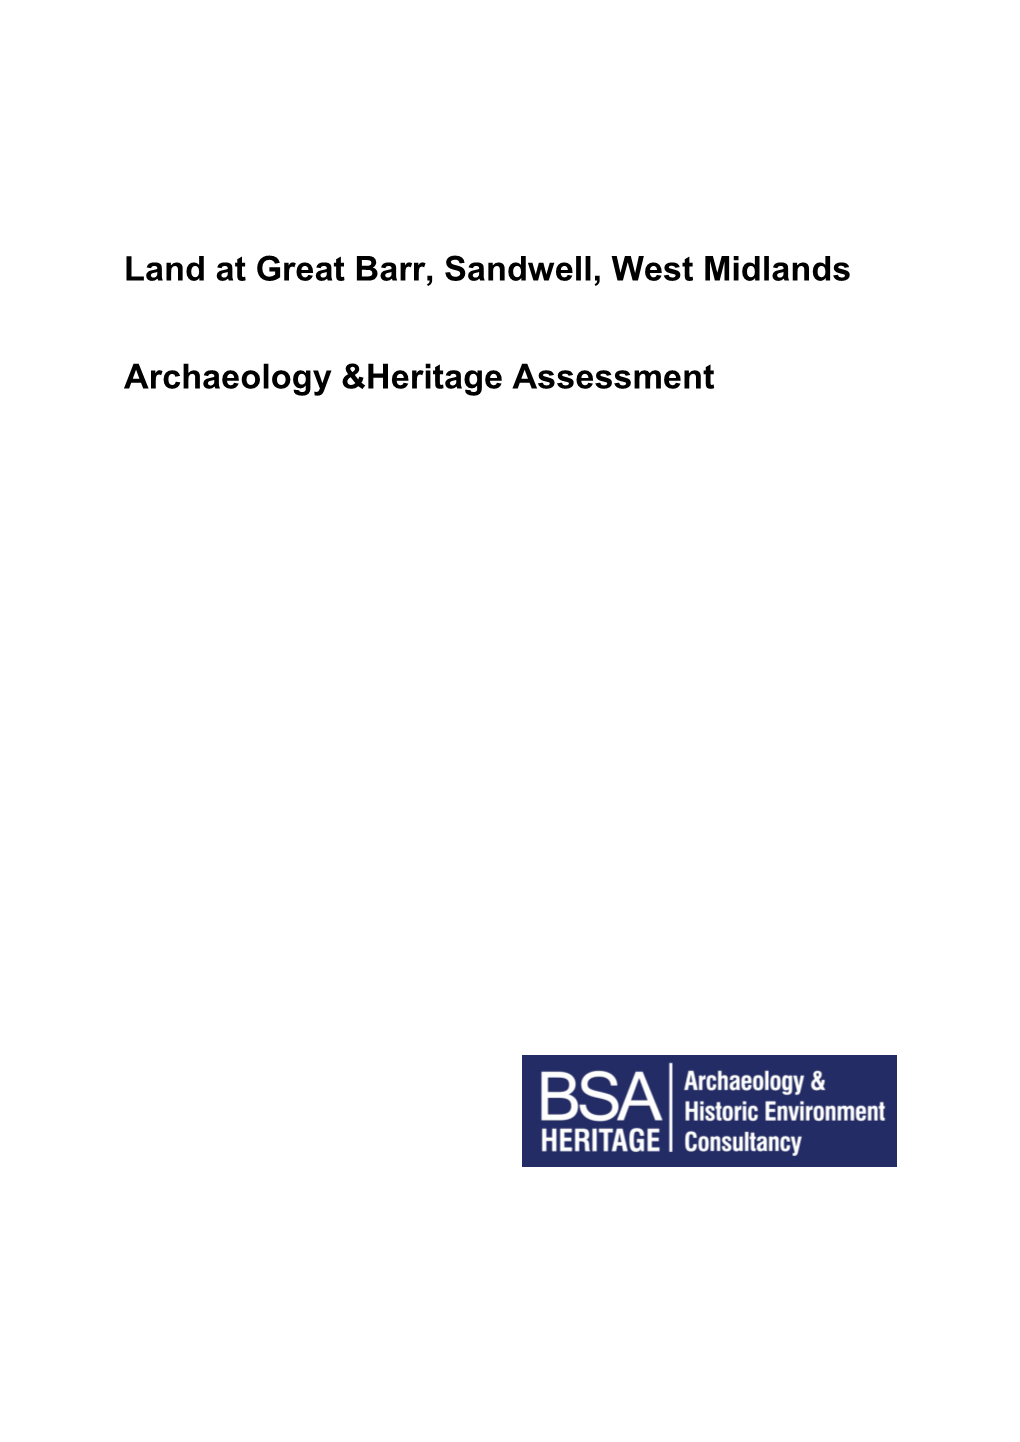 Land at Great Barr, Sandwell, West Midlands Archaeology &Heritage